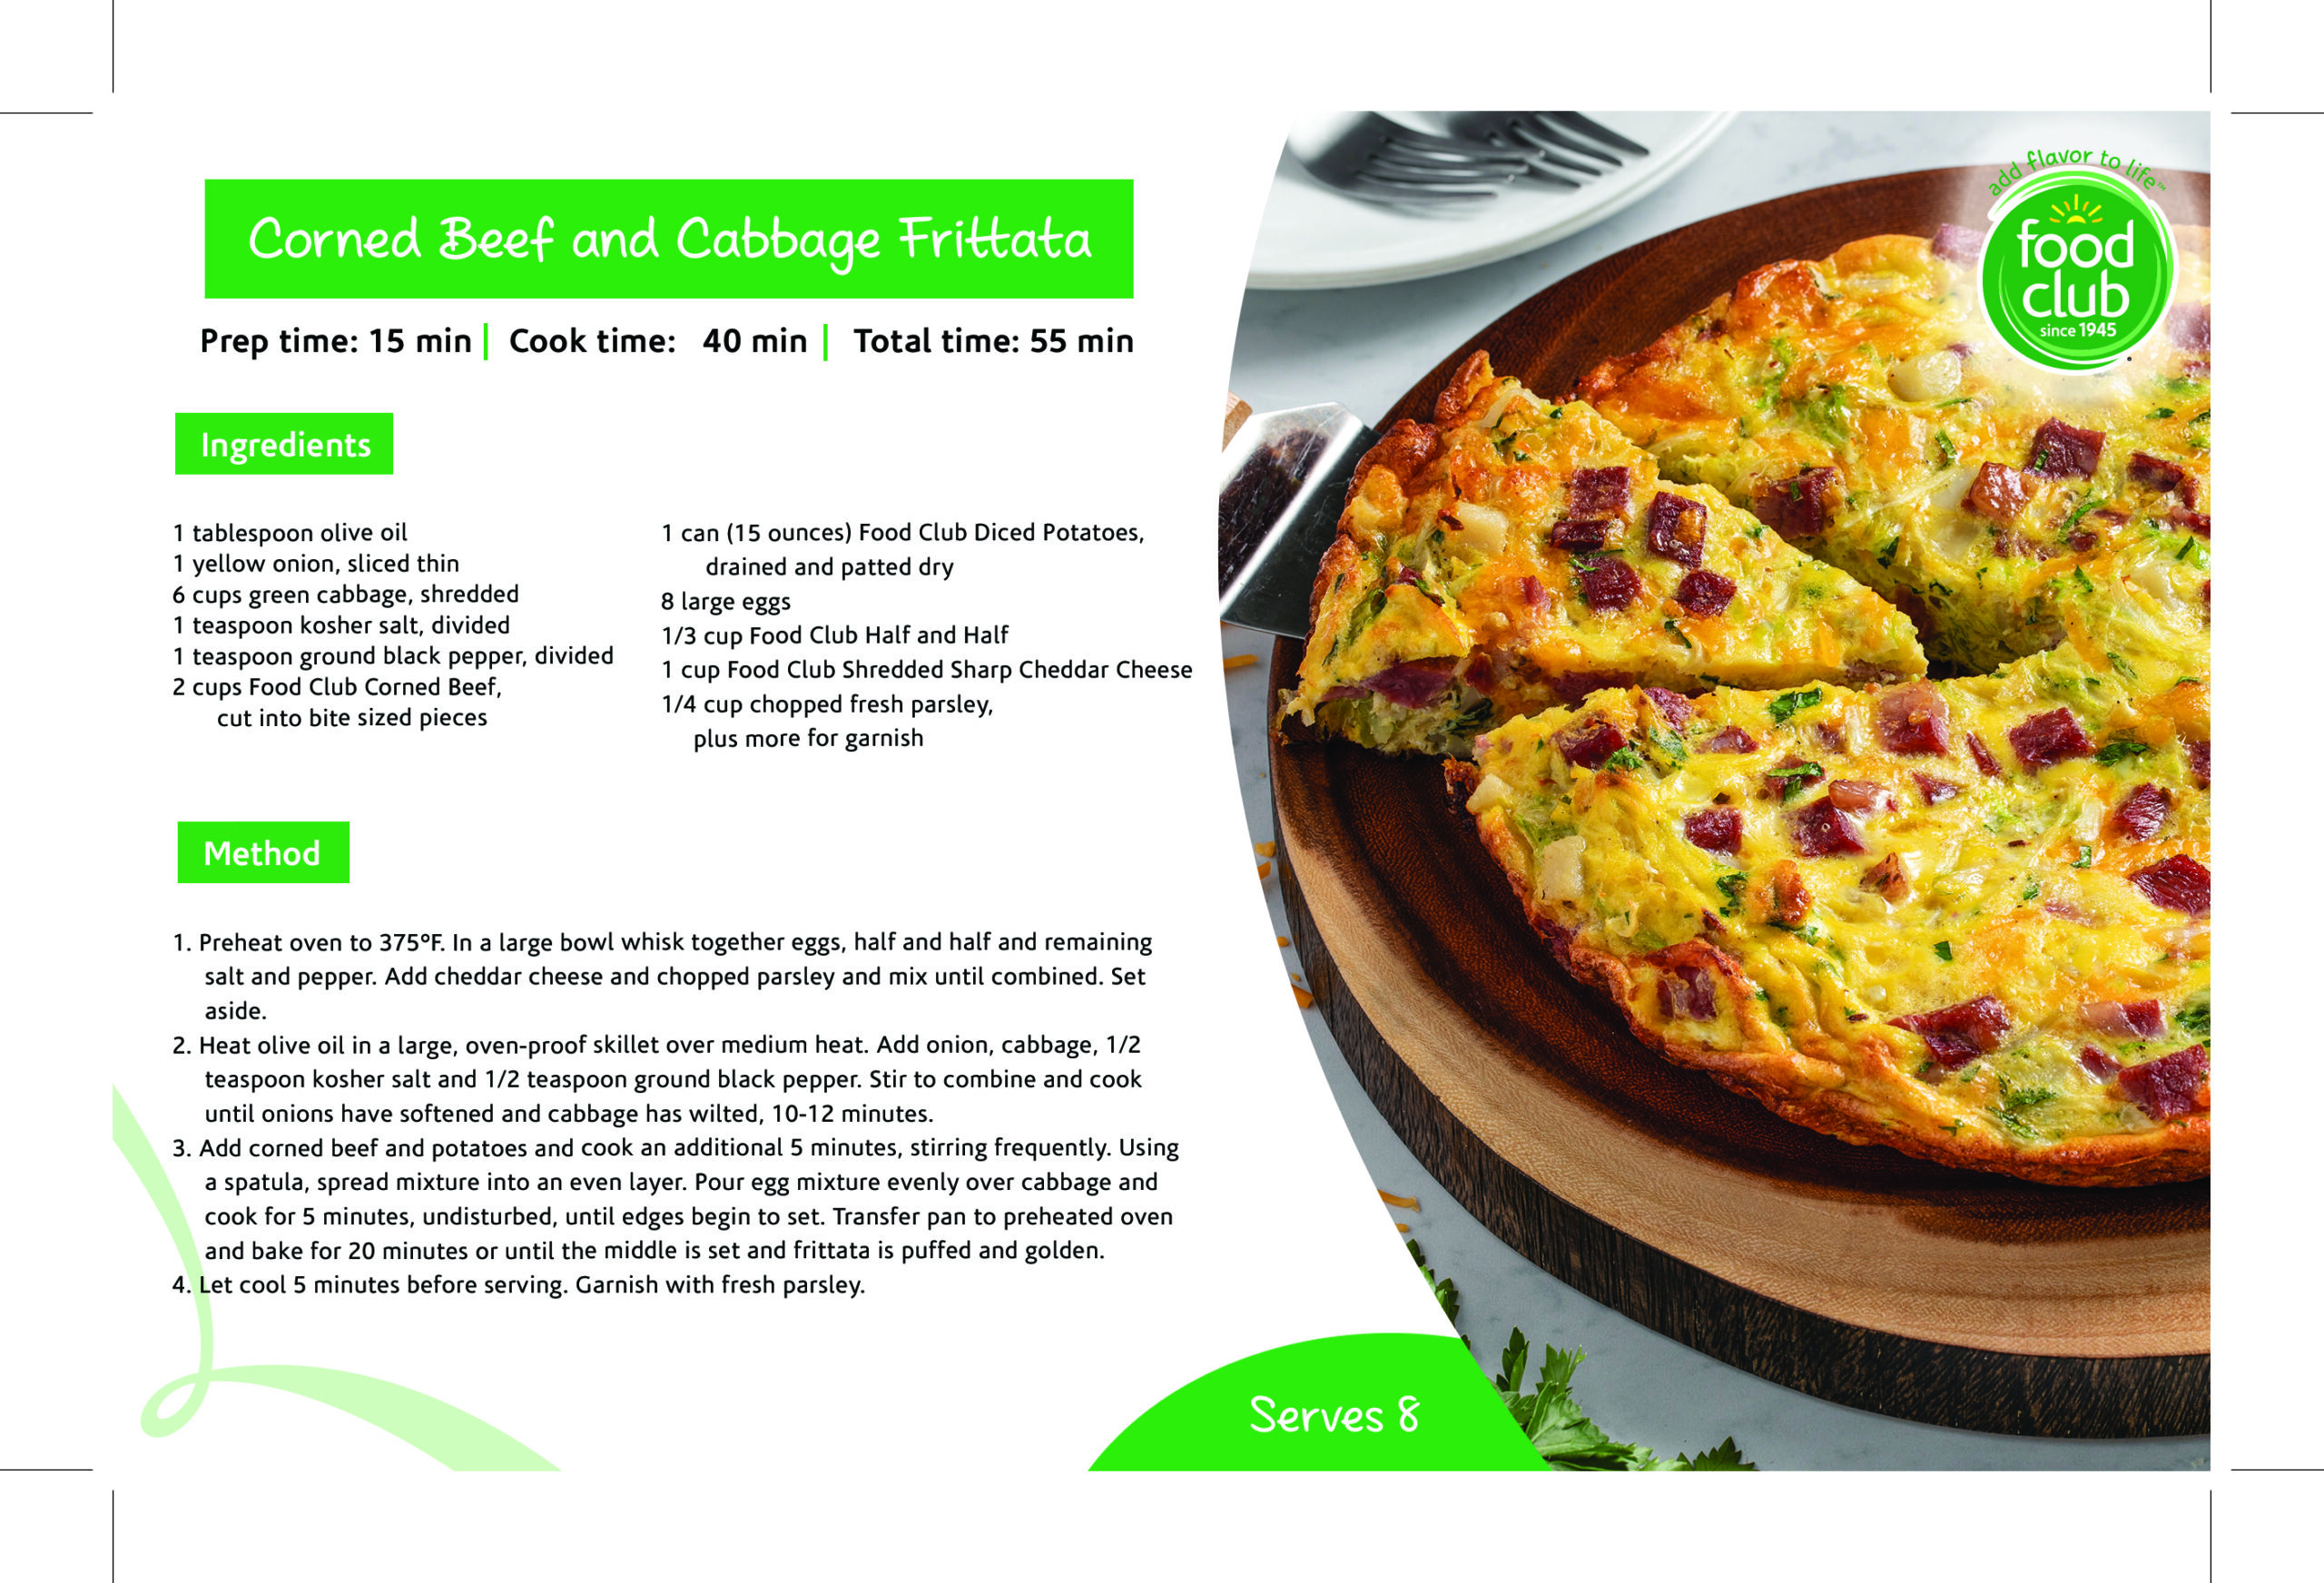 Corned Beef and Cabbage Frittata Recipe